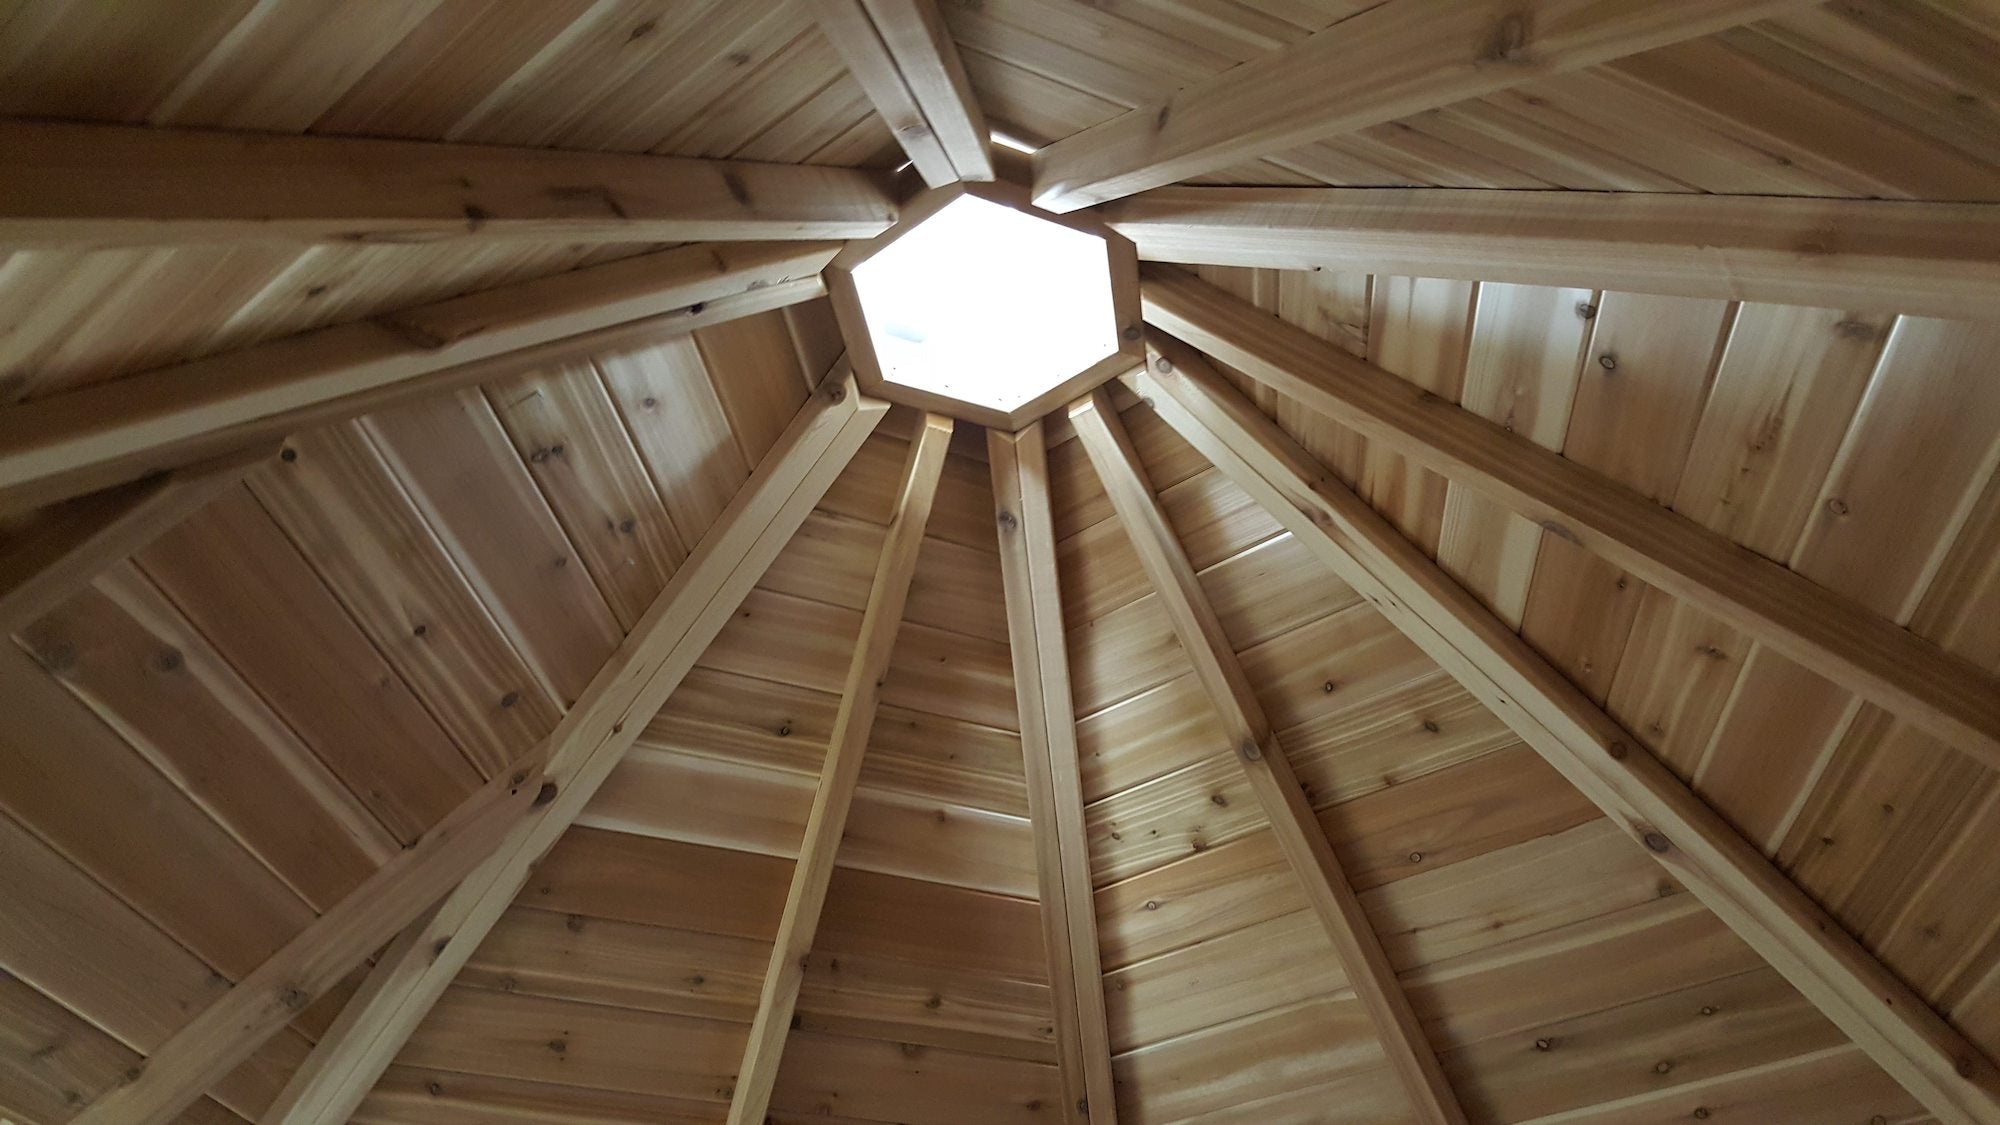      Light shines through the cabin structure, yet to have a chimney installed. Intricate wood-work makes up the ceiling.  